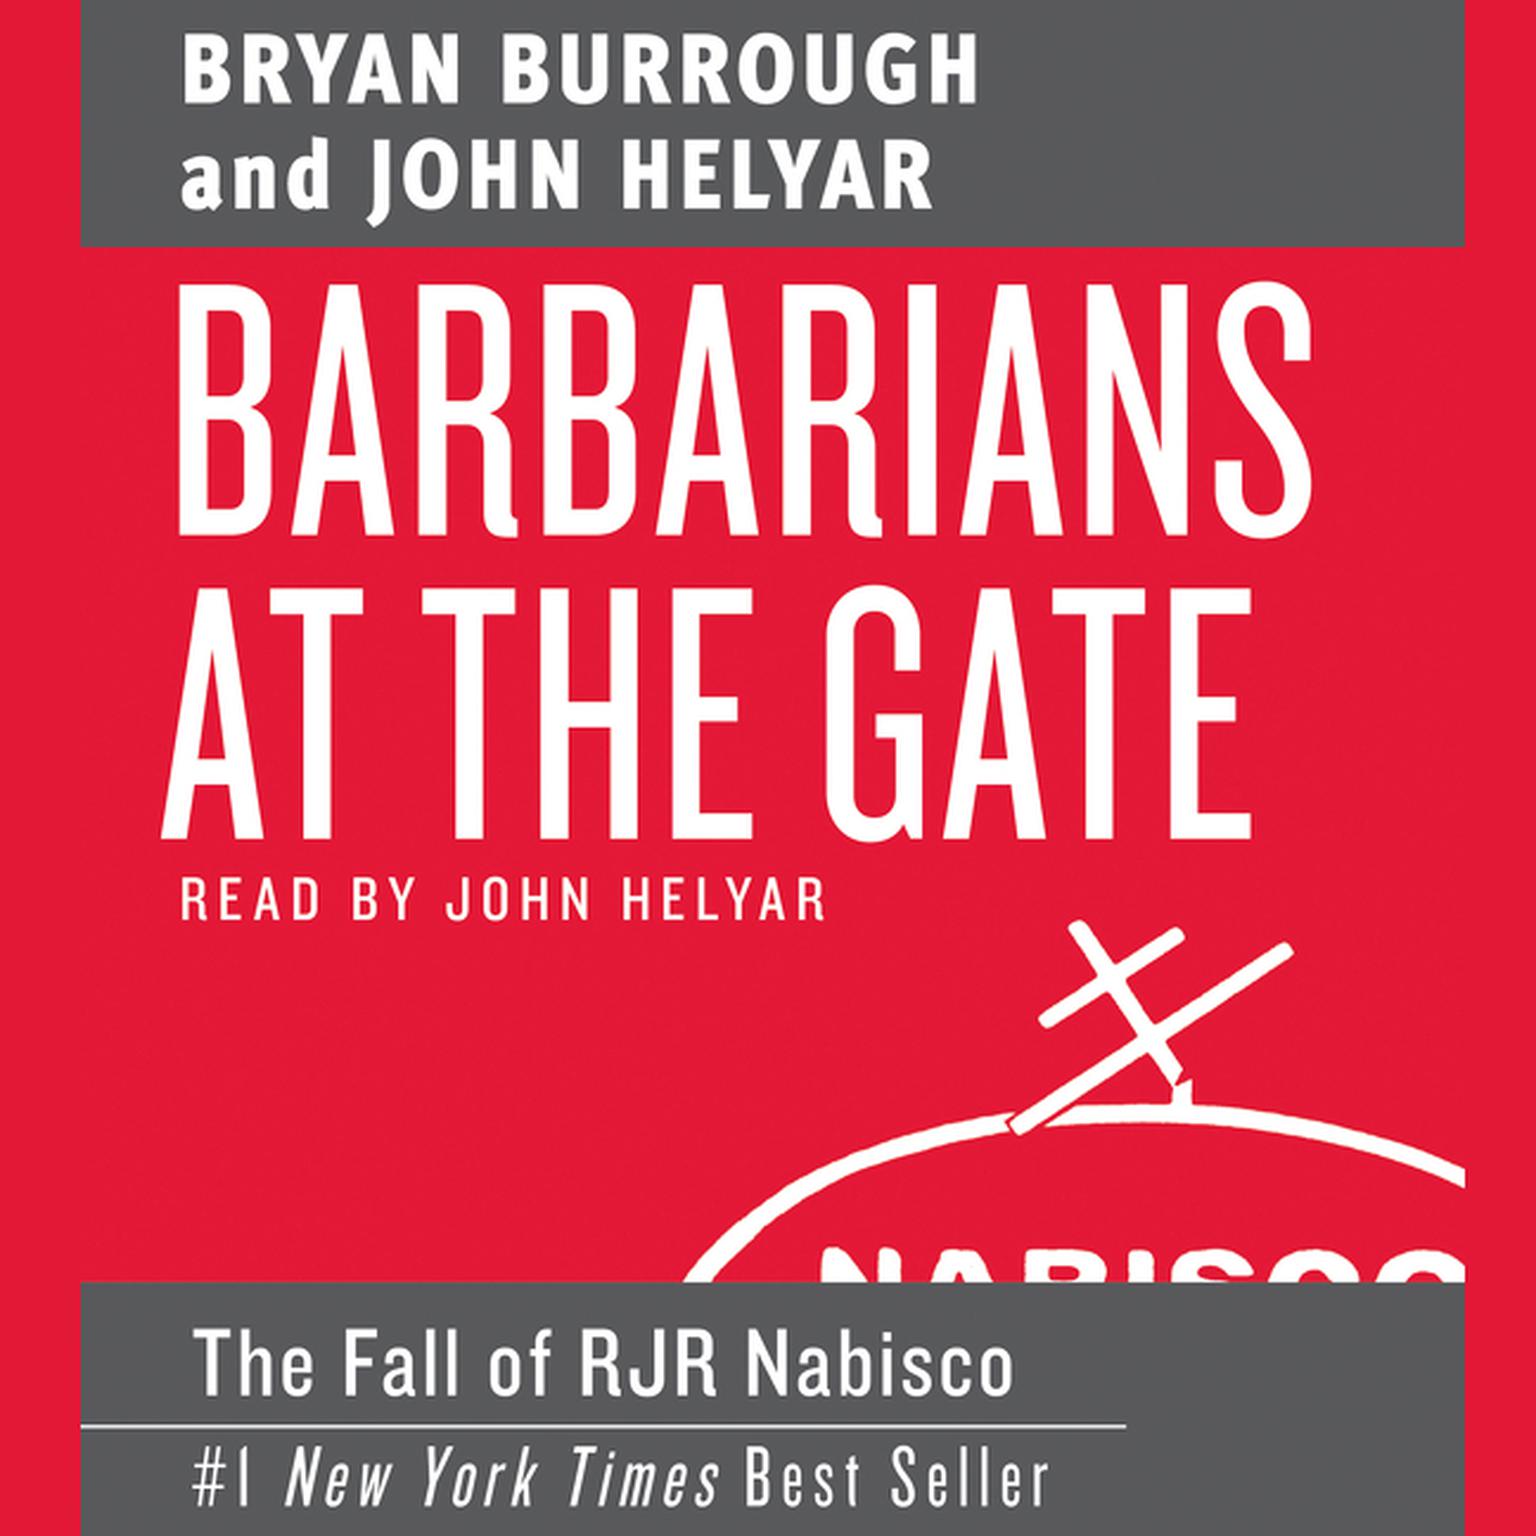 Barbarians at the Gate (Abridged): The Fall of RJR Nabisco Audiobook, by Bryan Burrough